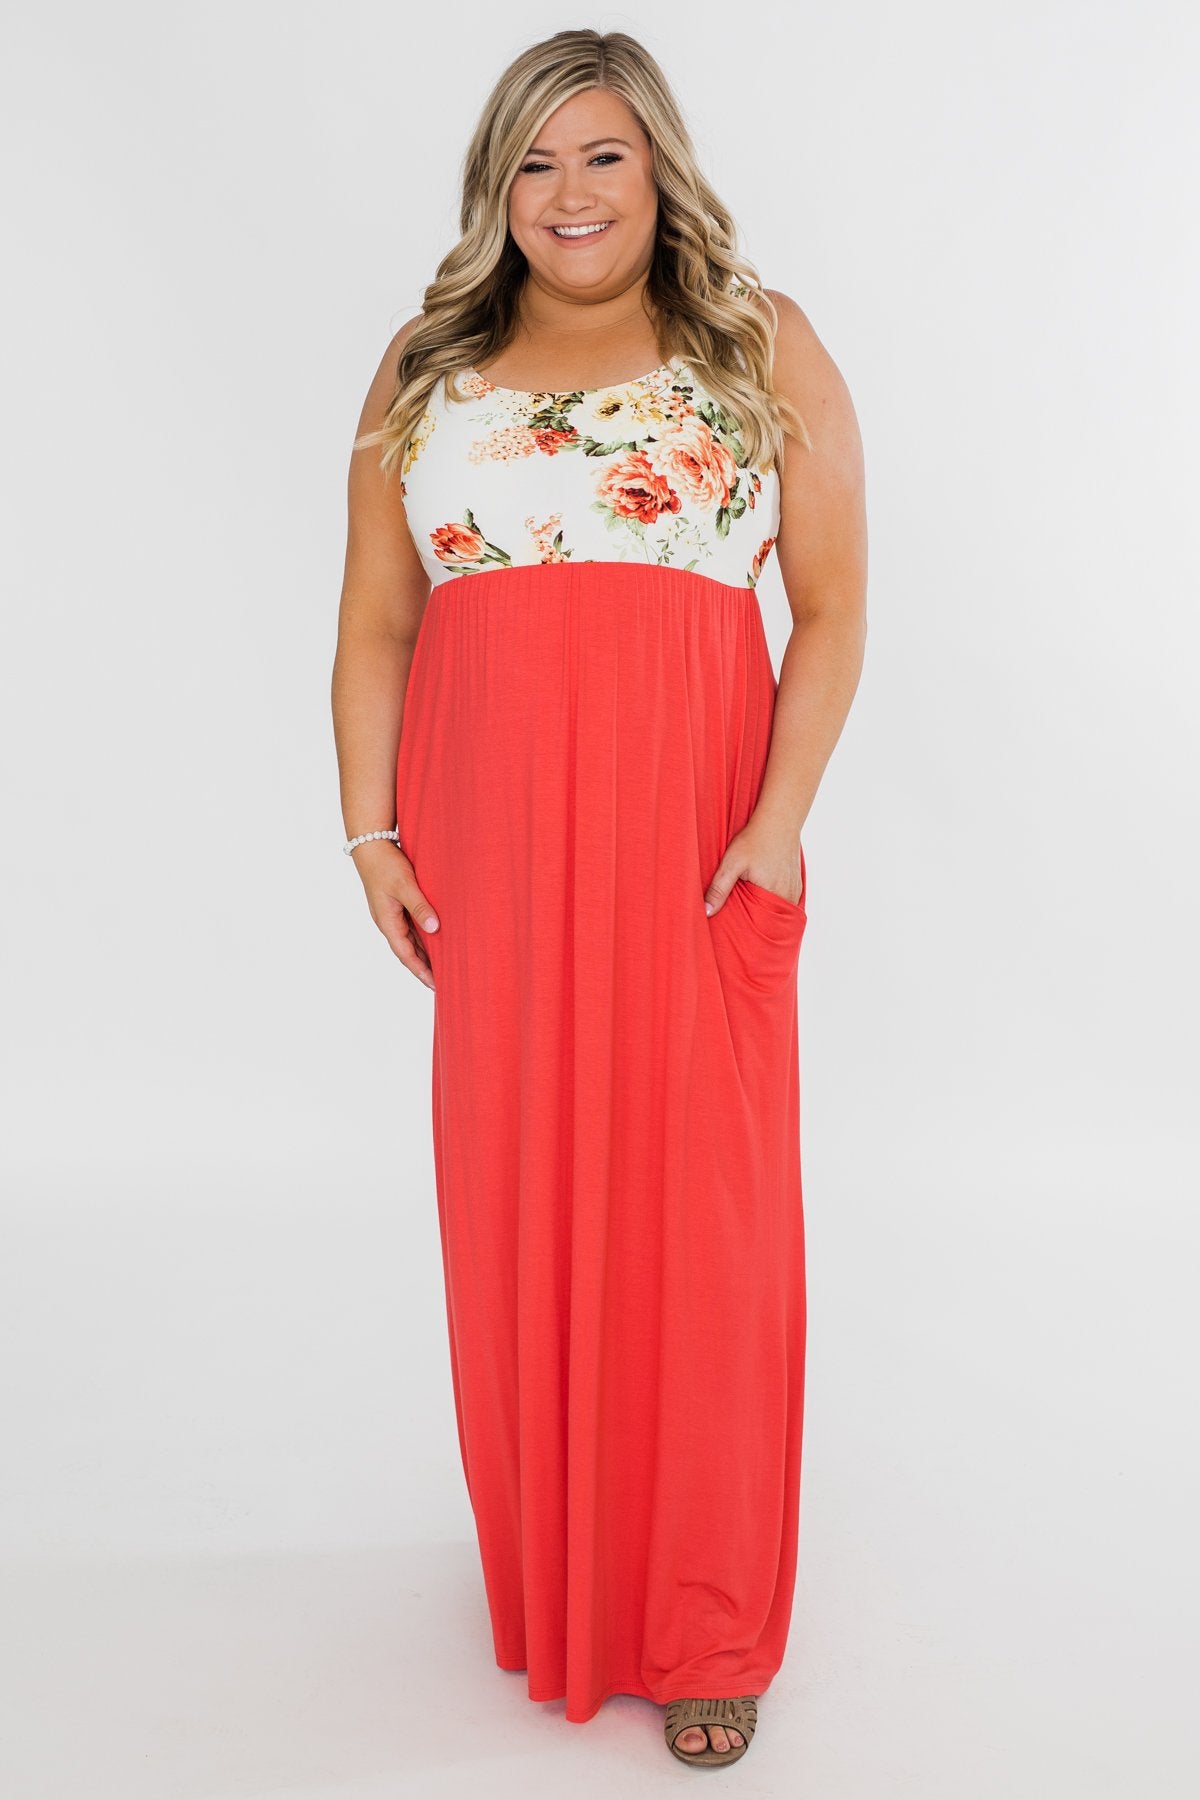 There She Goes Again Floral Maxi Dress- Vibrant Coral